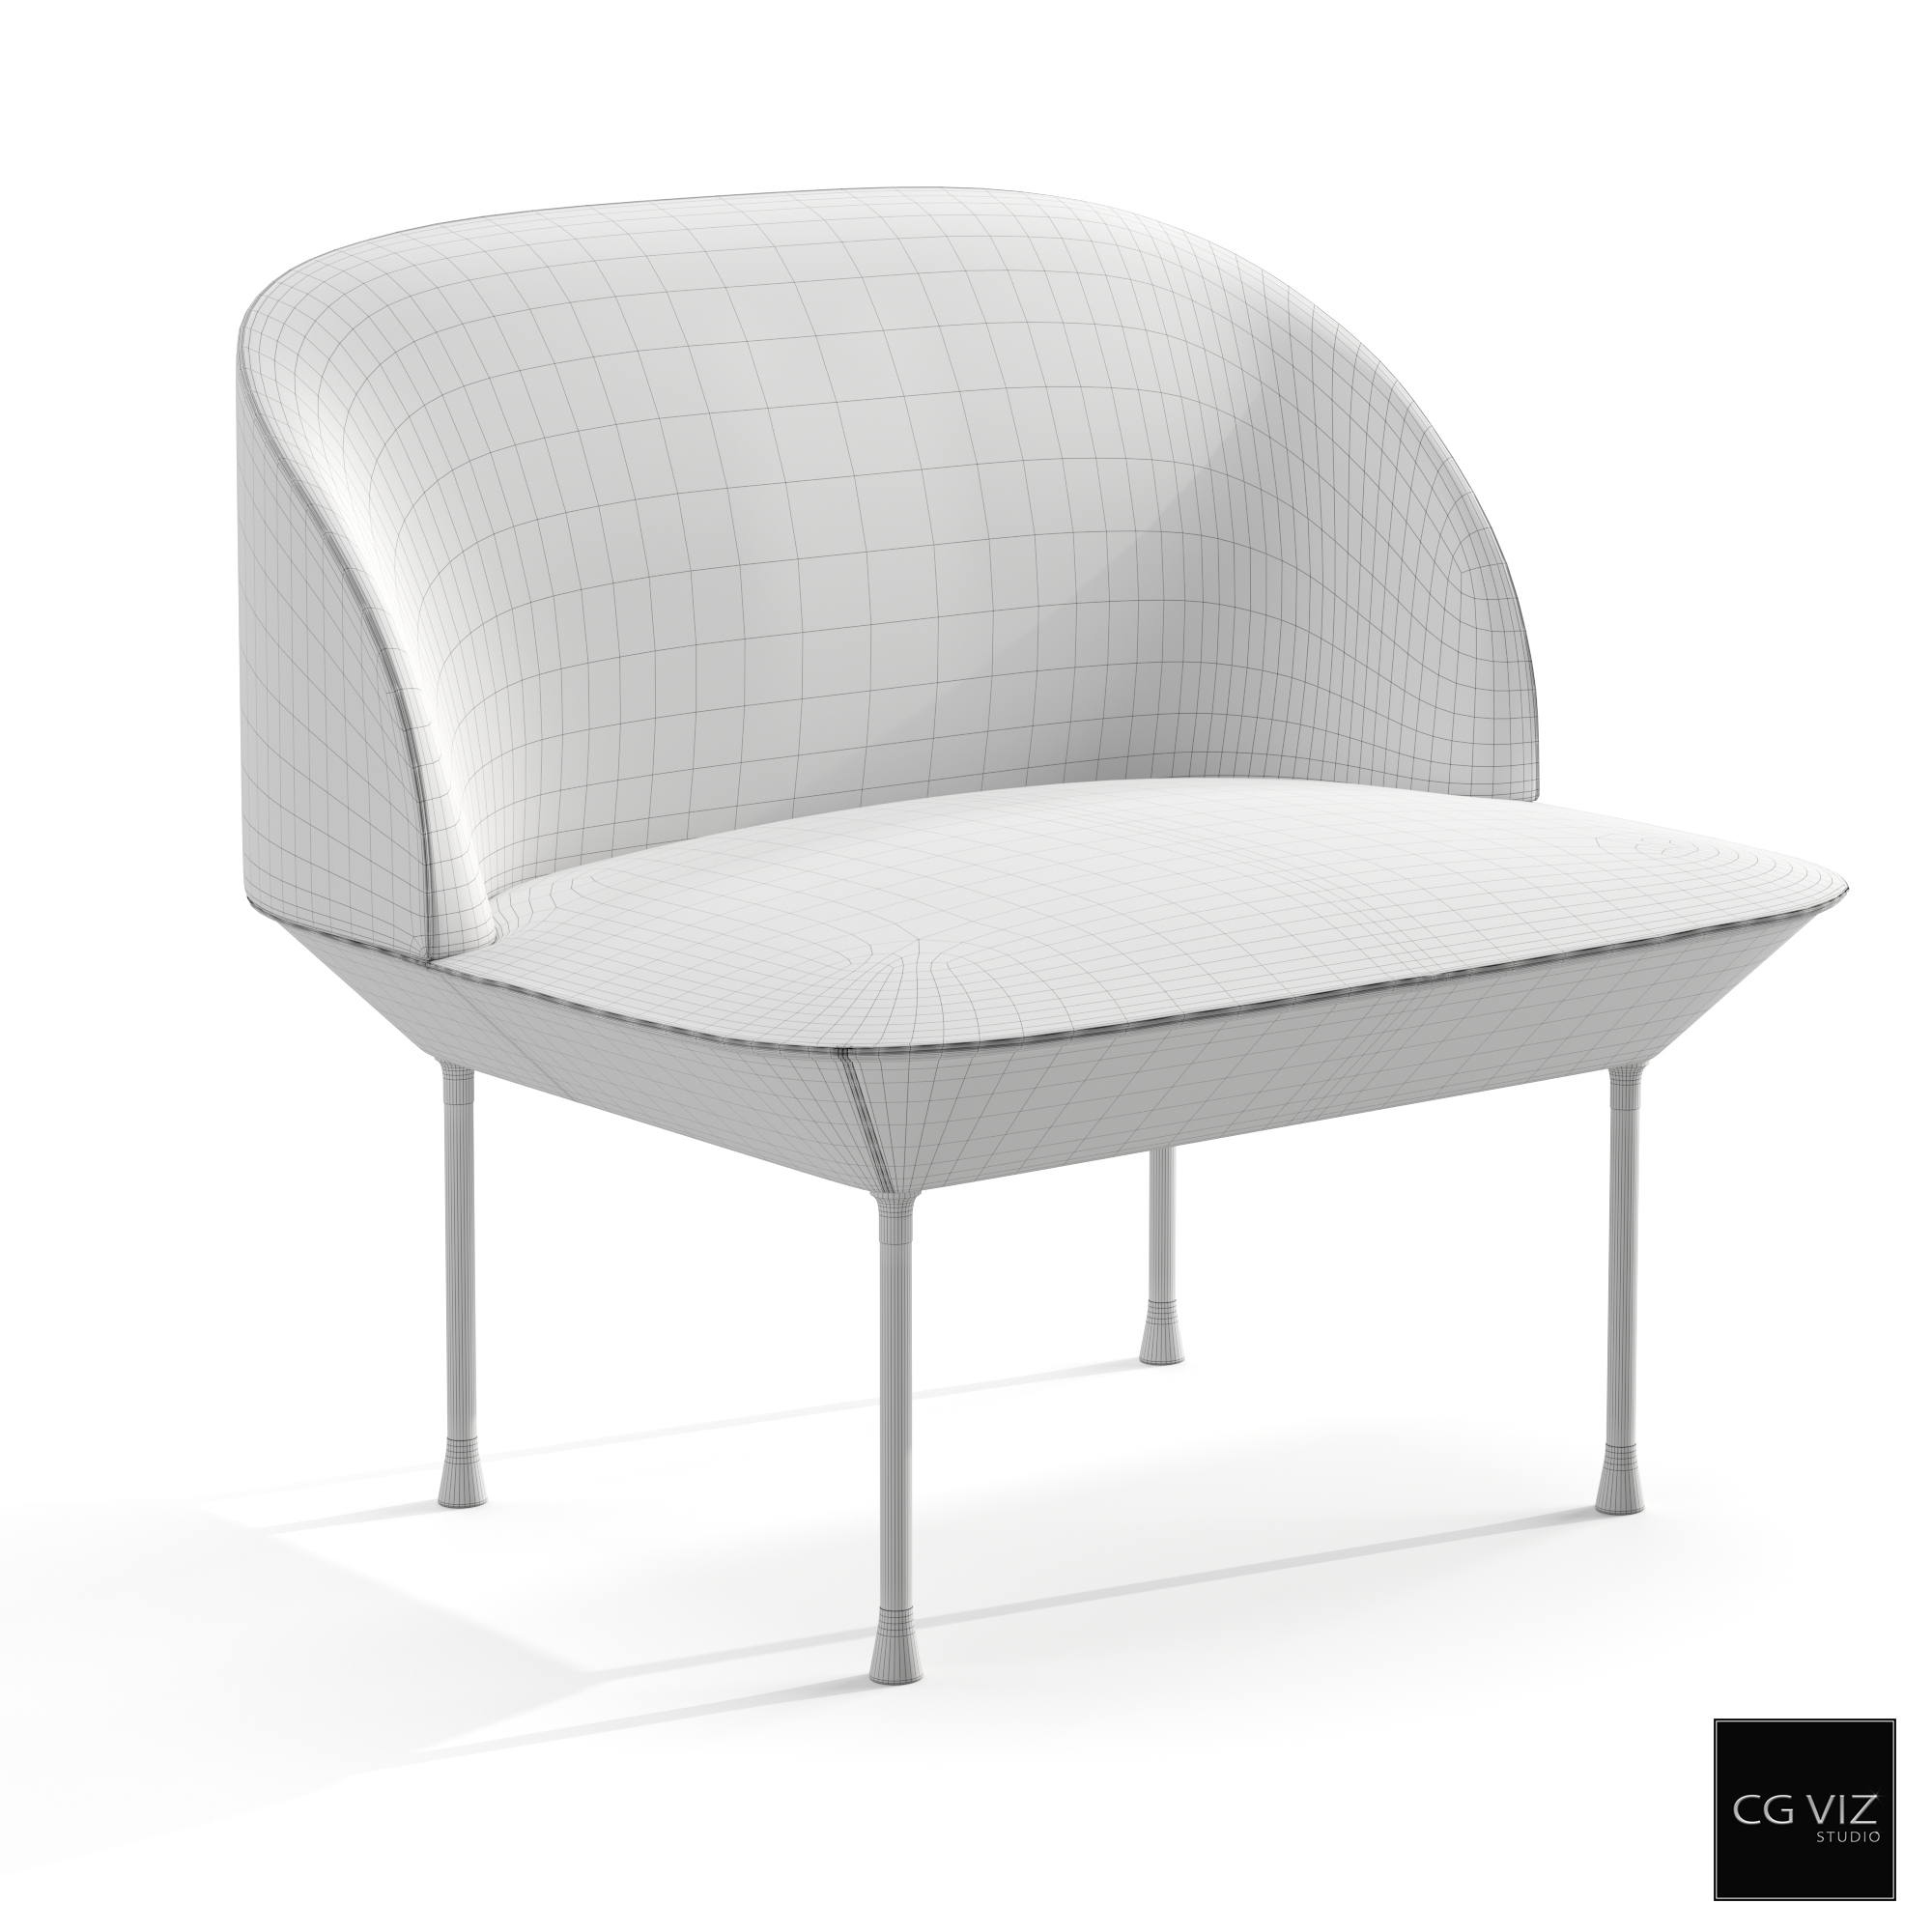 Wireframe View of Muuto Oslo Lounge Chair 3D Model